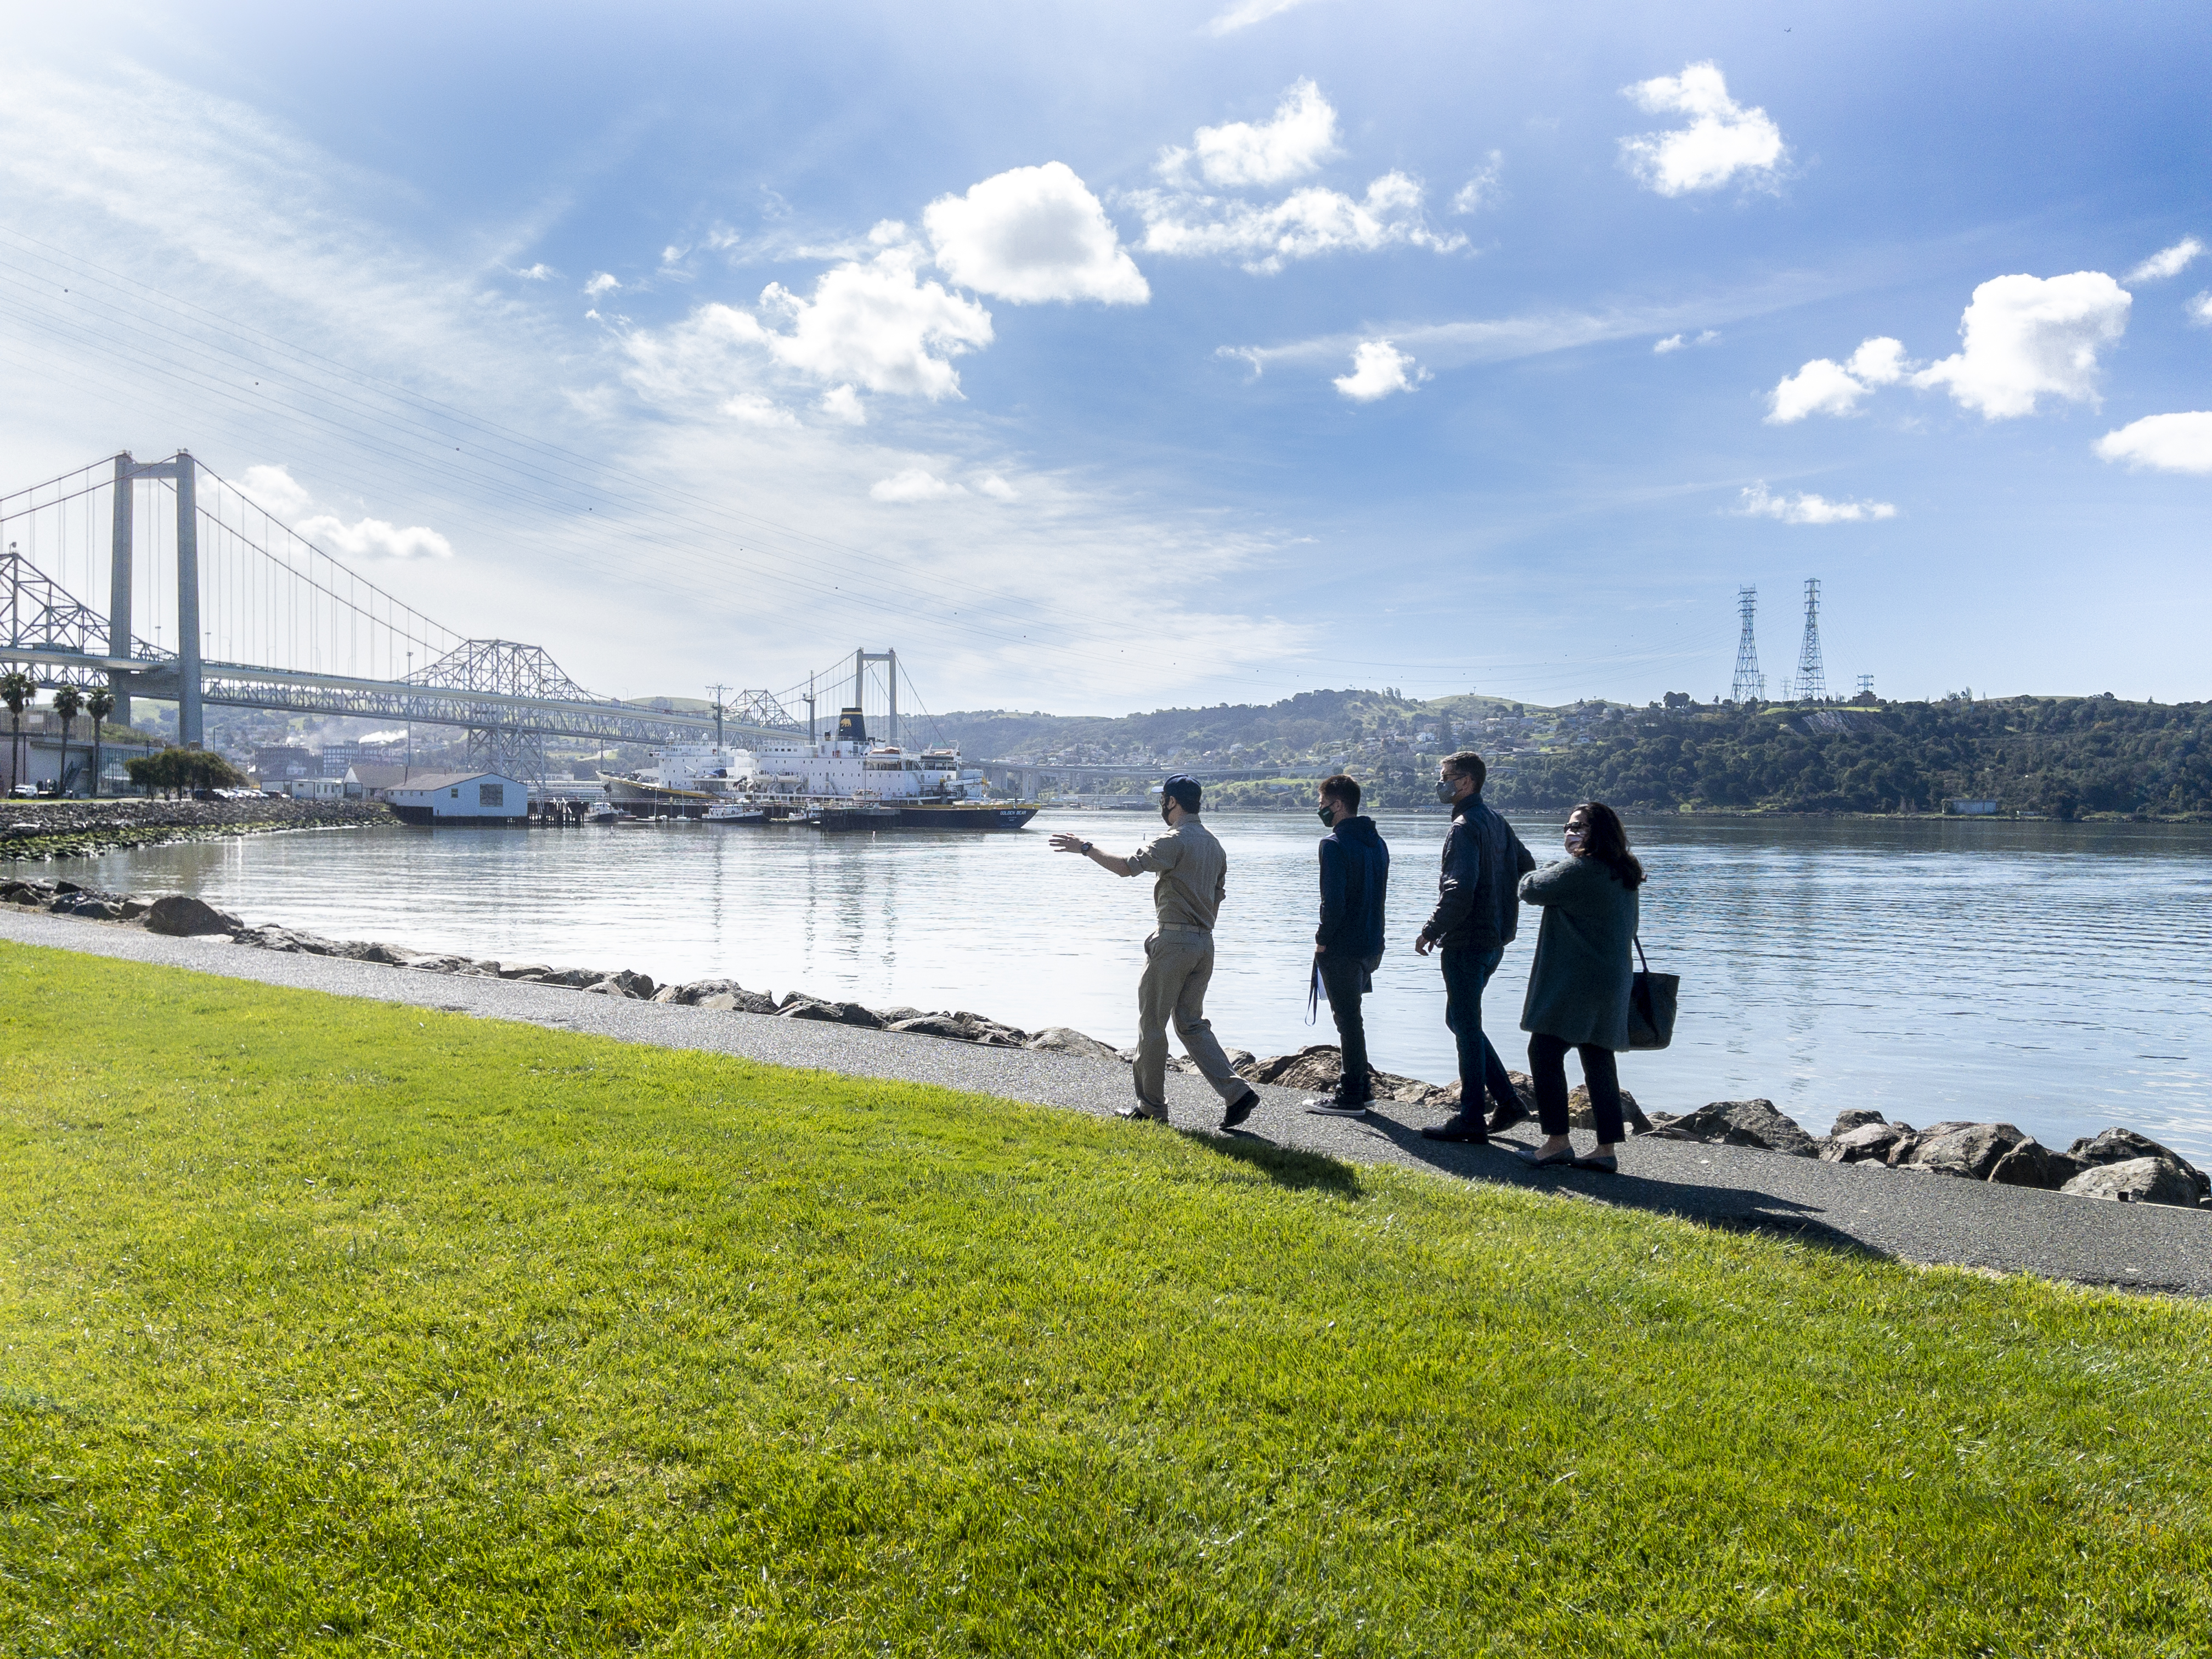 Family of 4 walks behind cadet tour guide along waterfront.